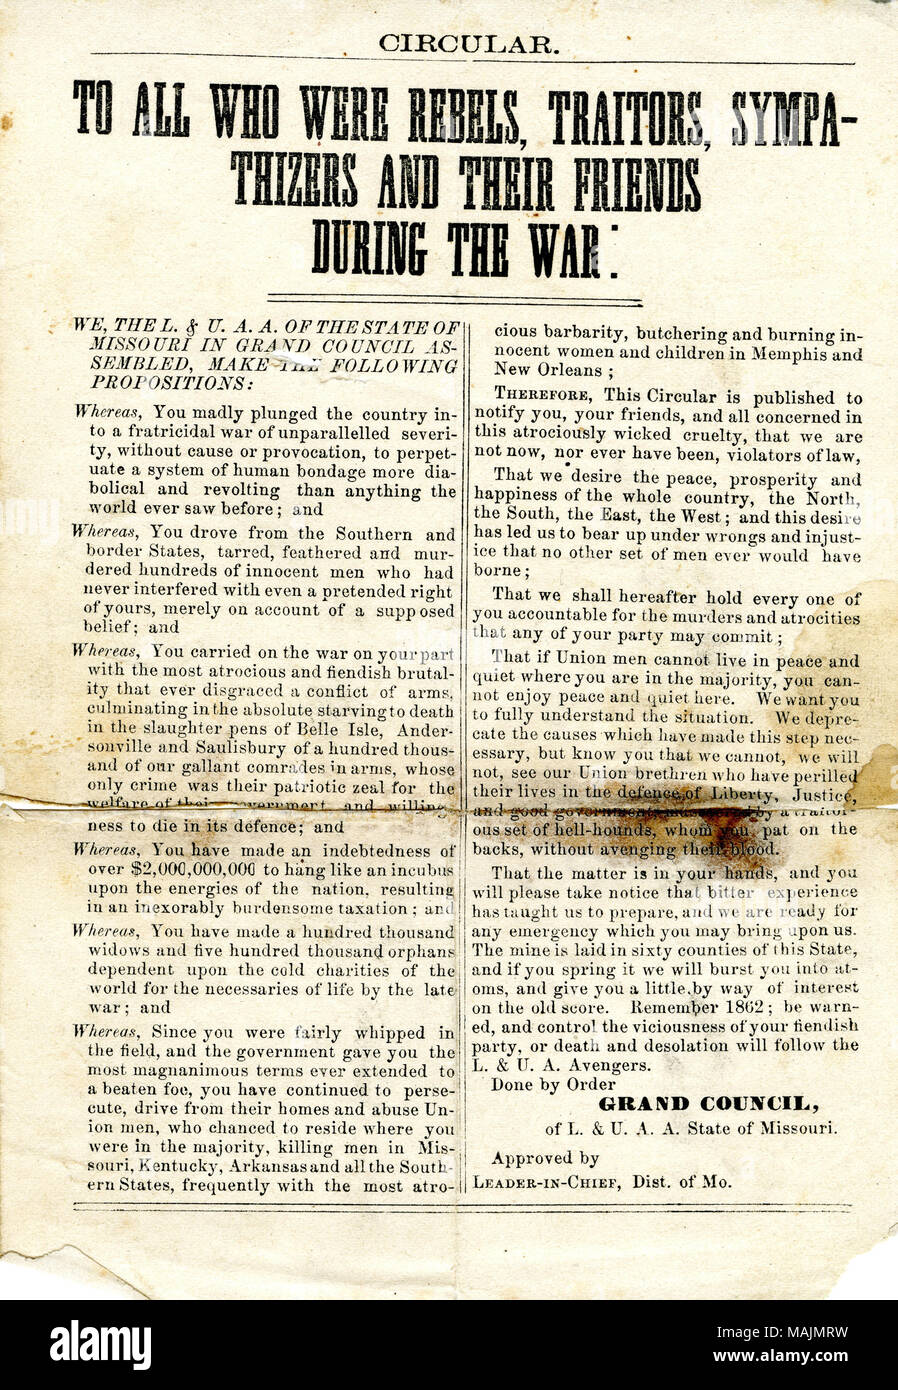 Circular titled “To All Who Were Rebels, Traitors, Sympathizers and Their Friends during the War,” provided by the Grand Council of the of the L. & U.A.A. of the State of Missouri, page one, no date. Civil War Collection, Missouri History Museum, St. Louis, Missouri. Stock Photo